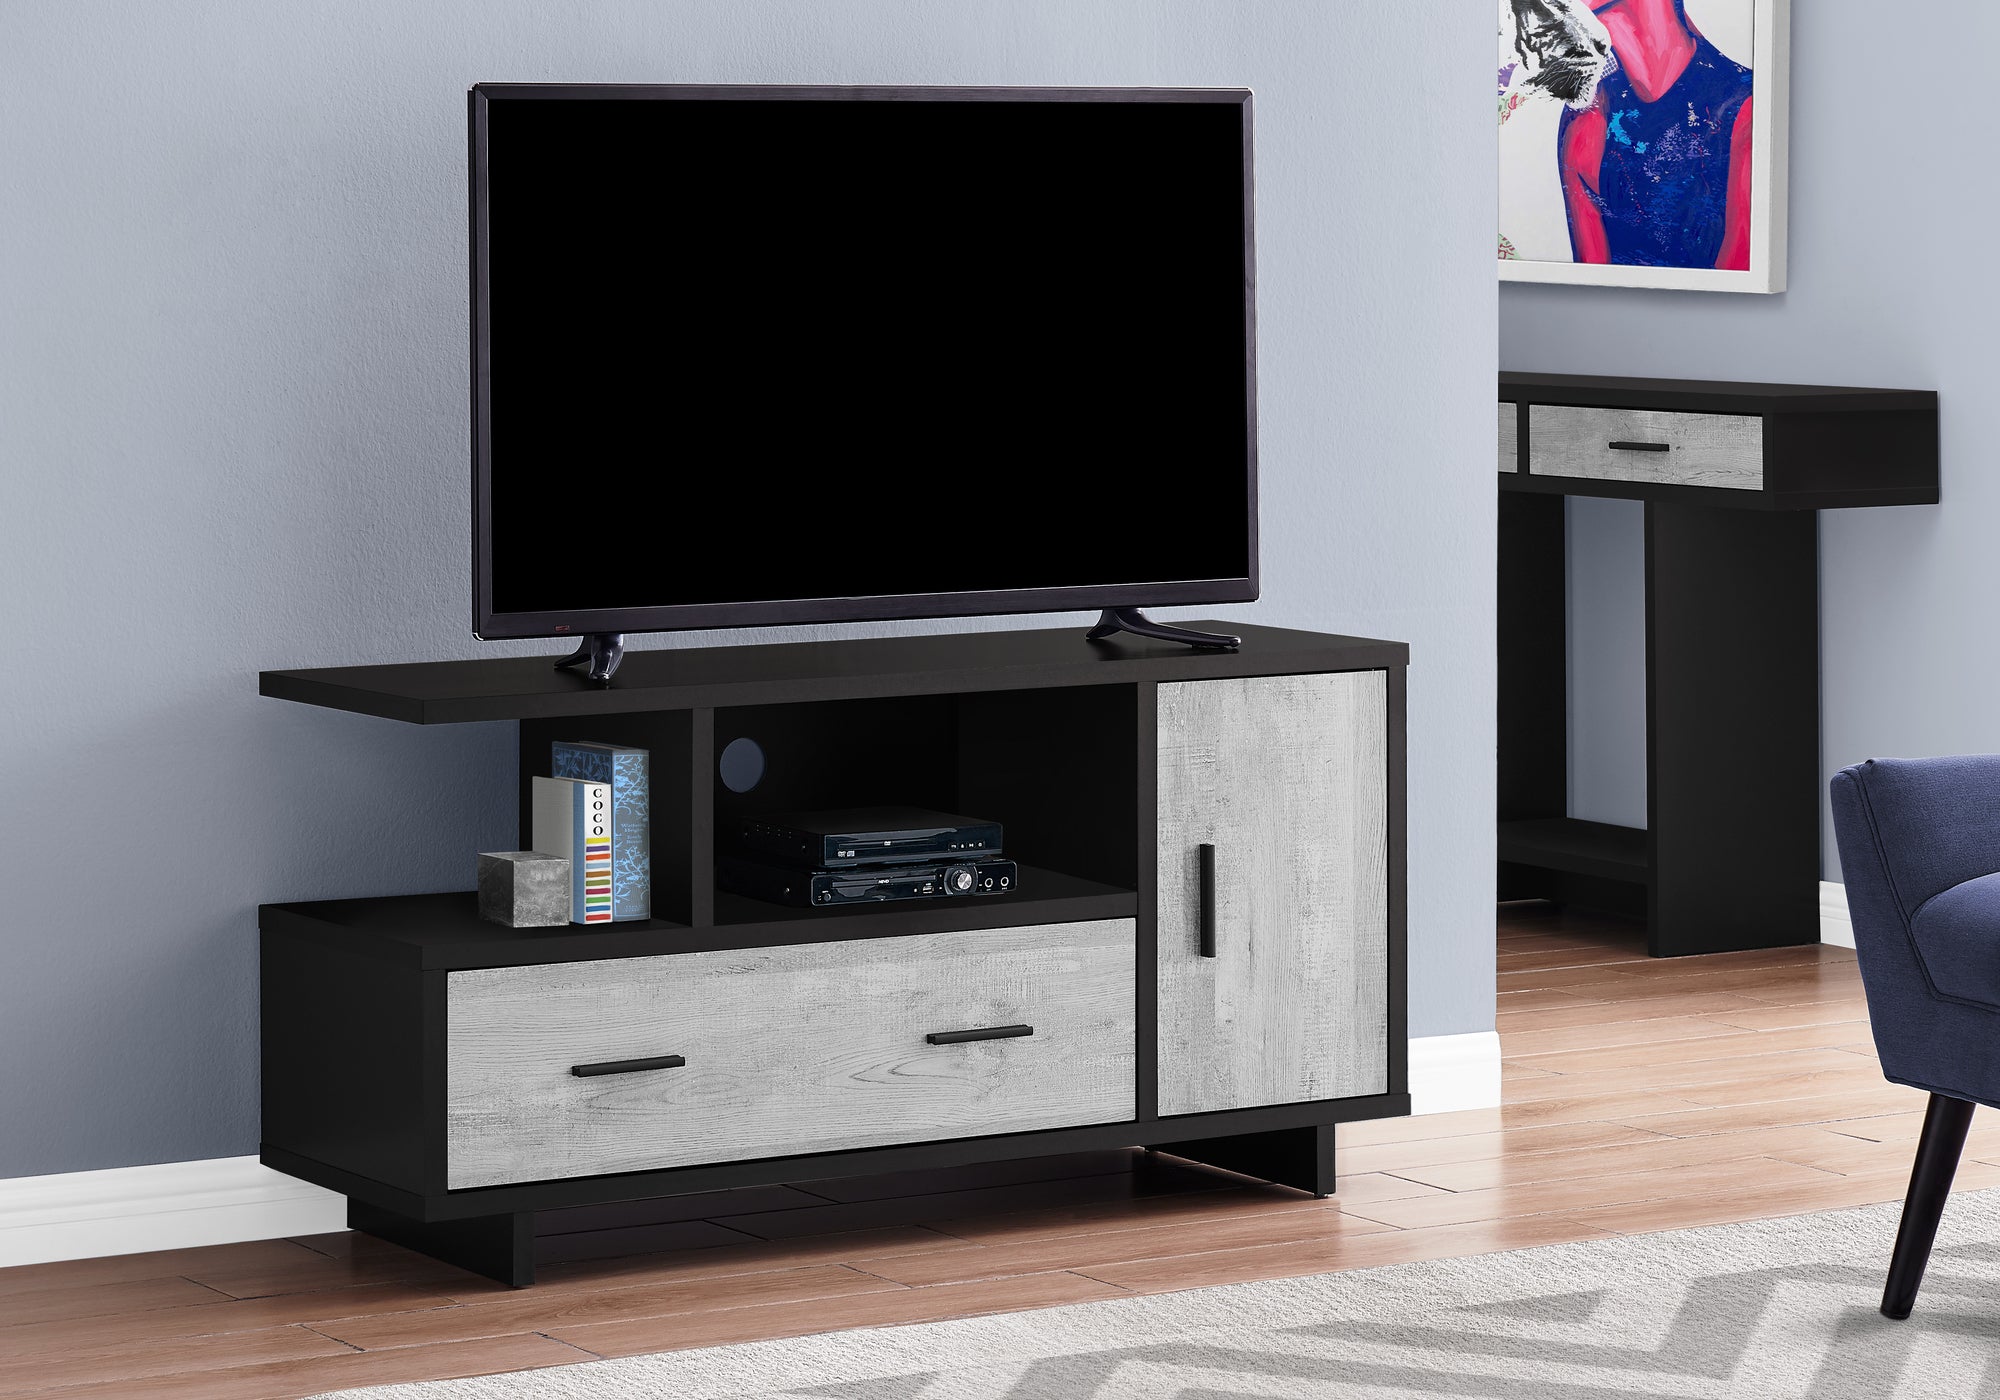 MN-372804    Tv Stand, 48 Inch, Console, Media Entertainment Center, Storage Cabinet, Living Room, Bedroom, Laminate, Black, Grey Reclaimed Wood Look, Contemporary, Modern